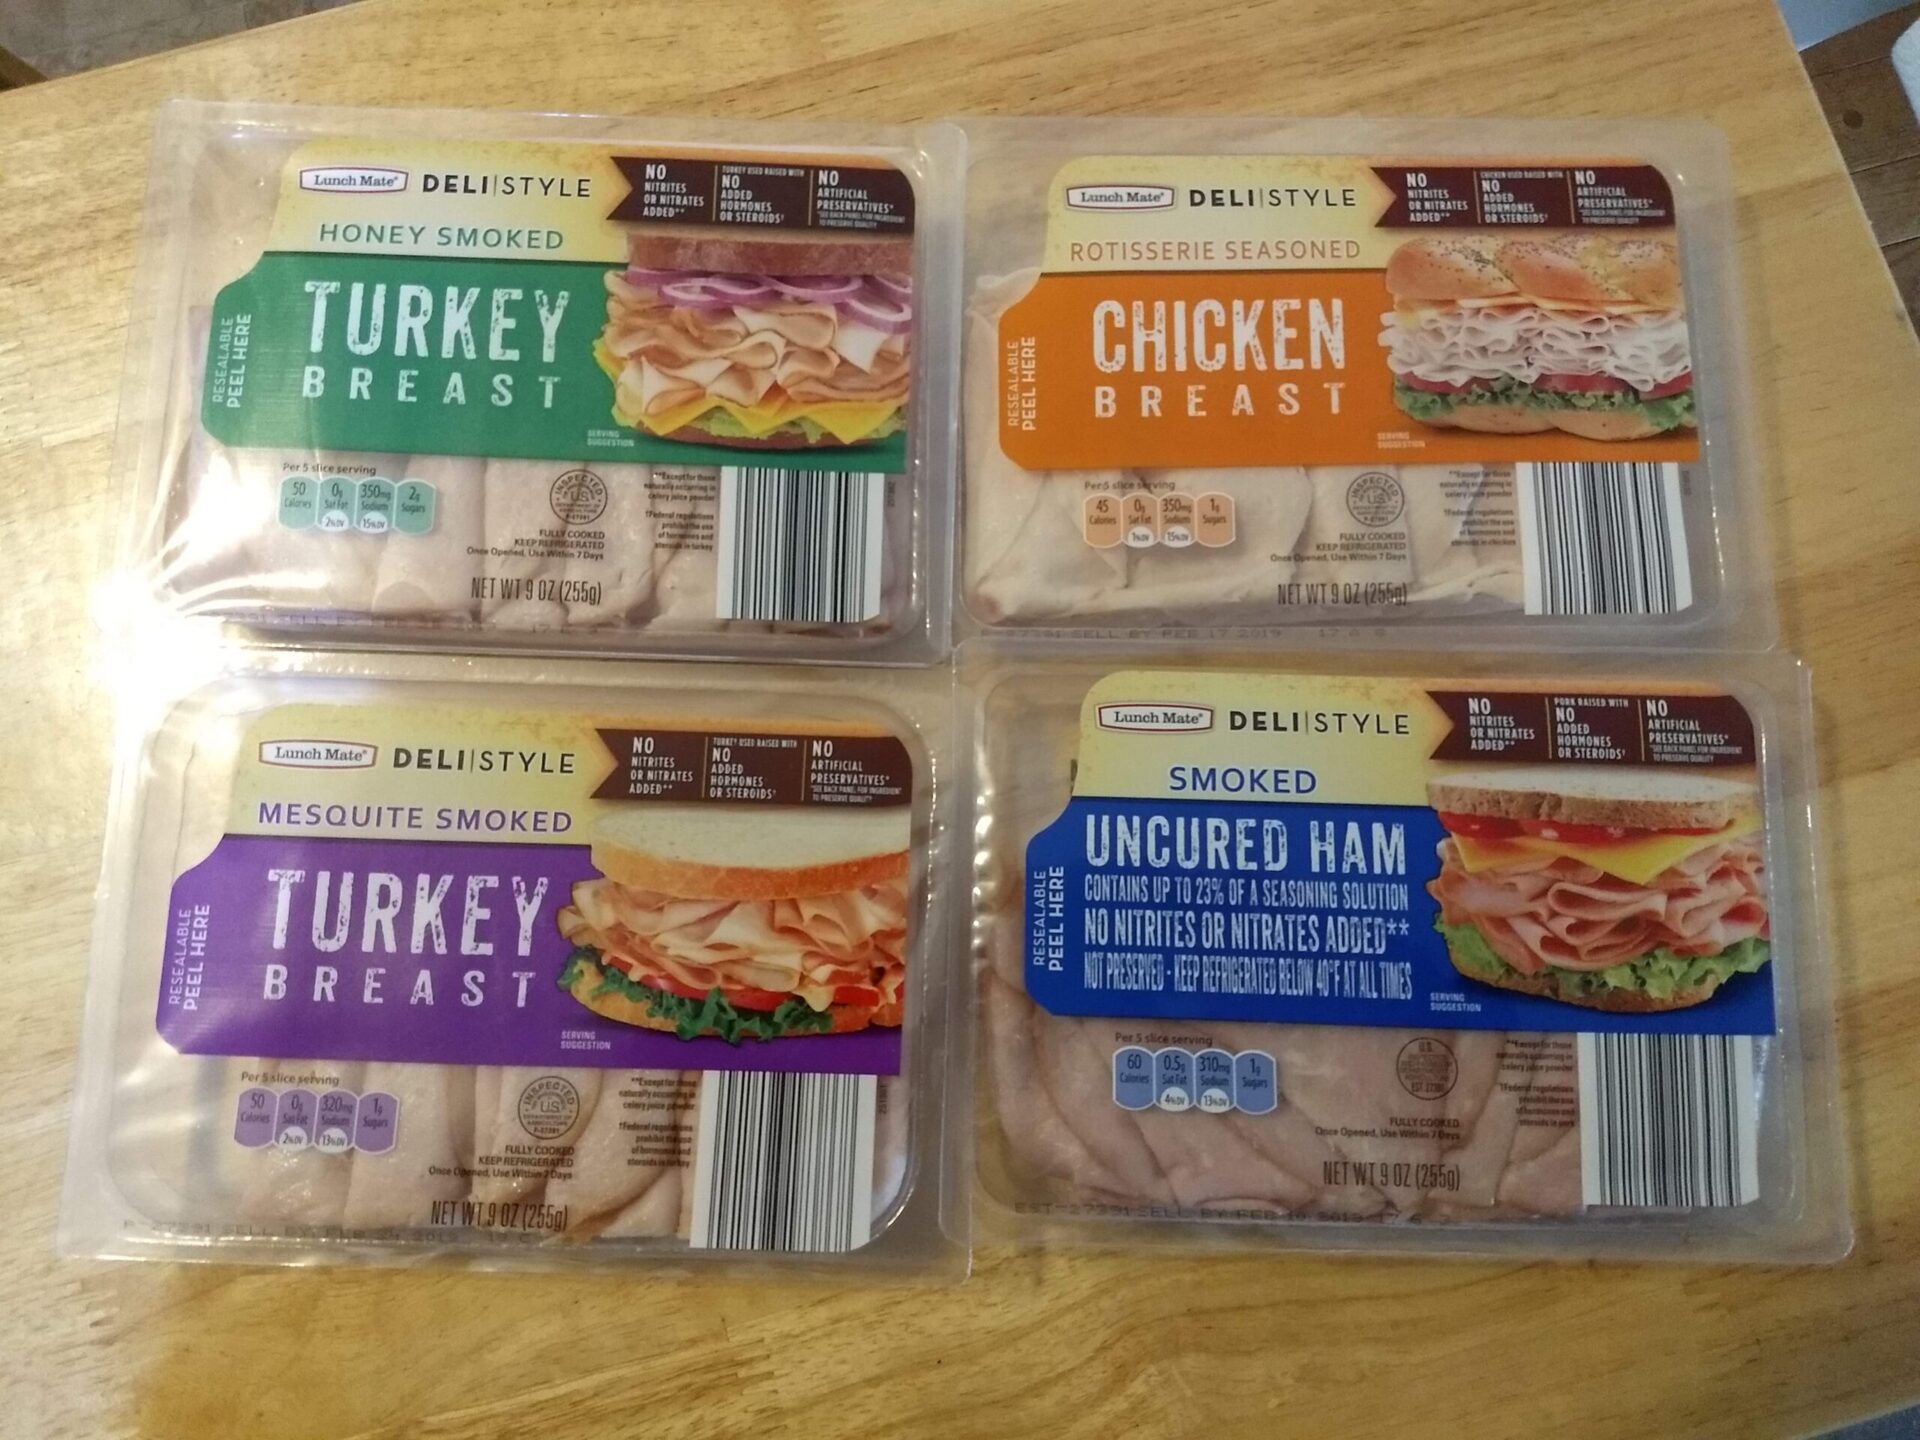 Lunch Mate Deli Style Lunchmeats | ALDI REVIEWER